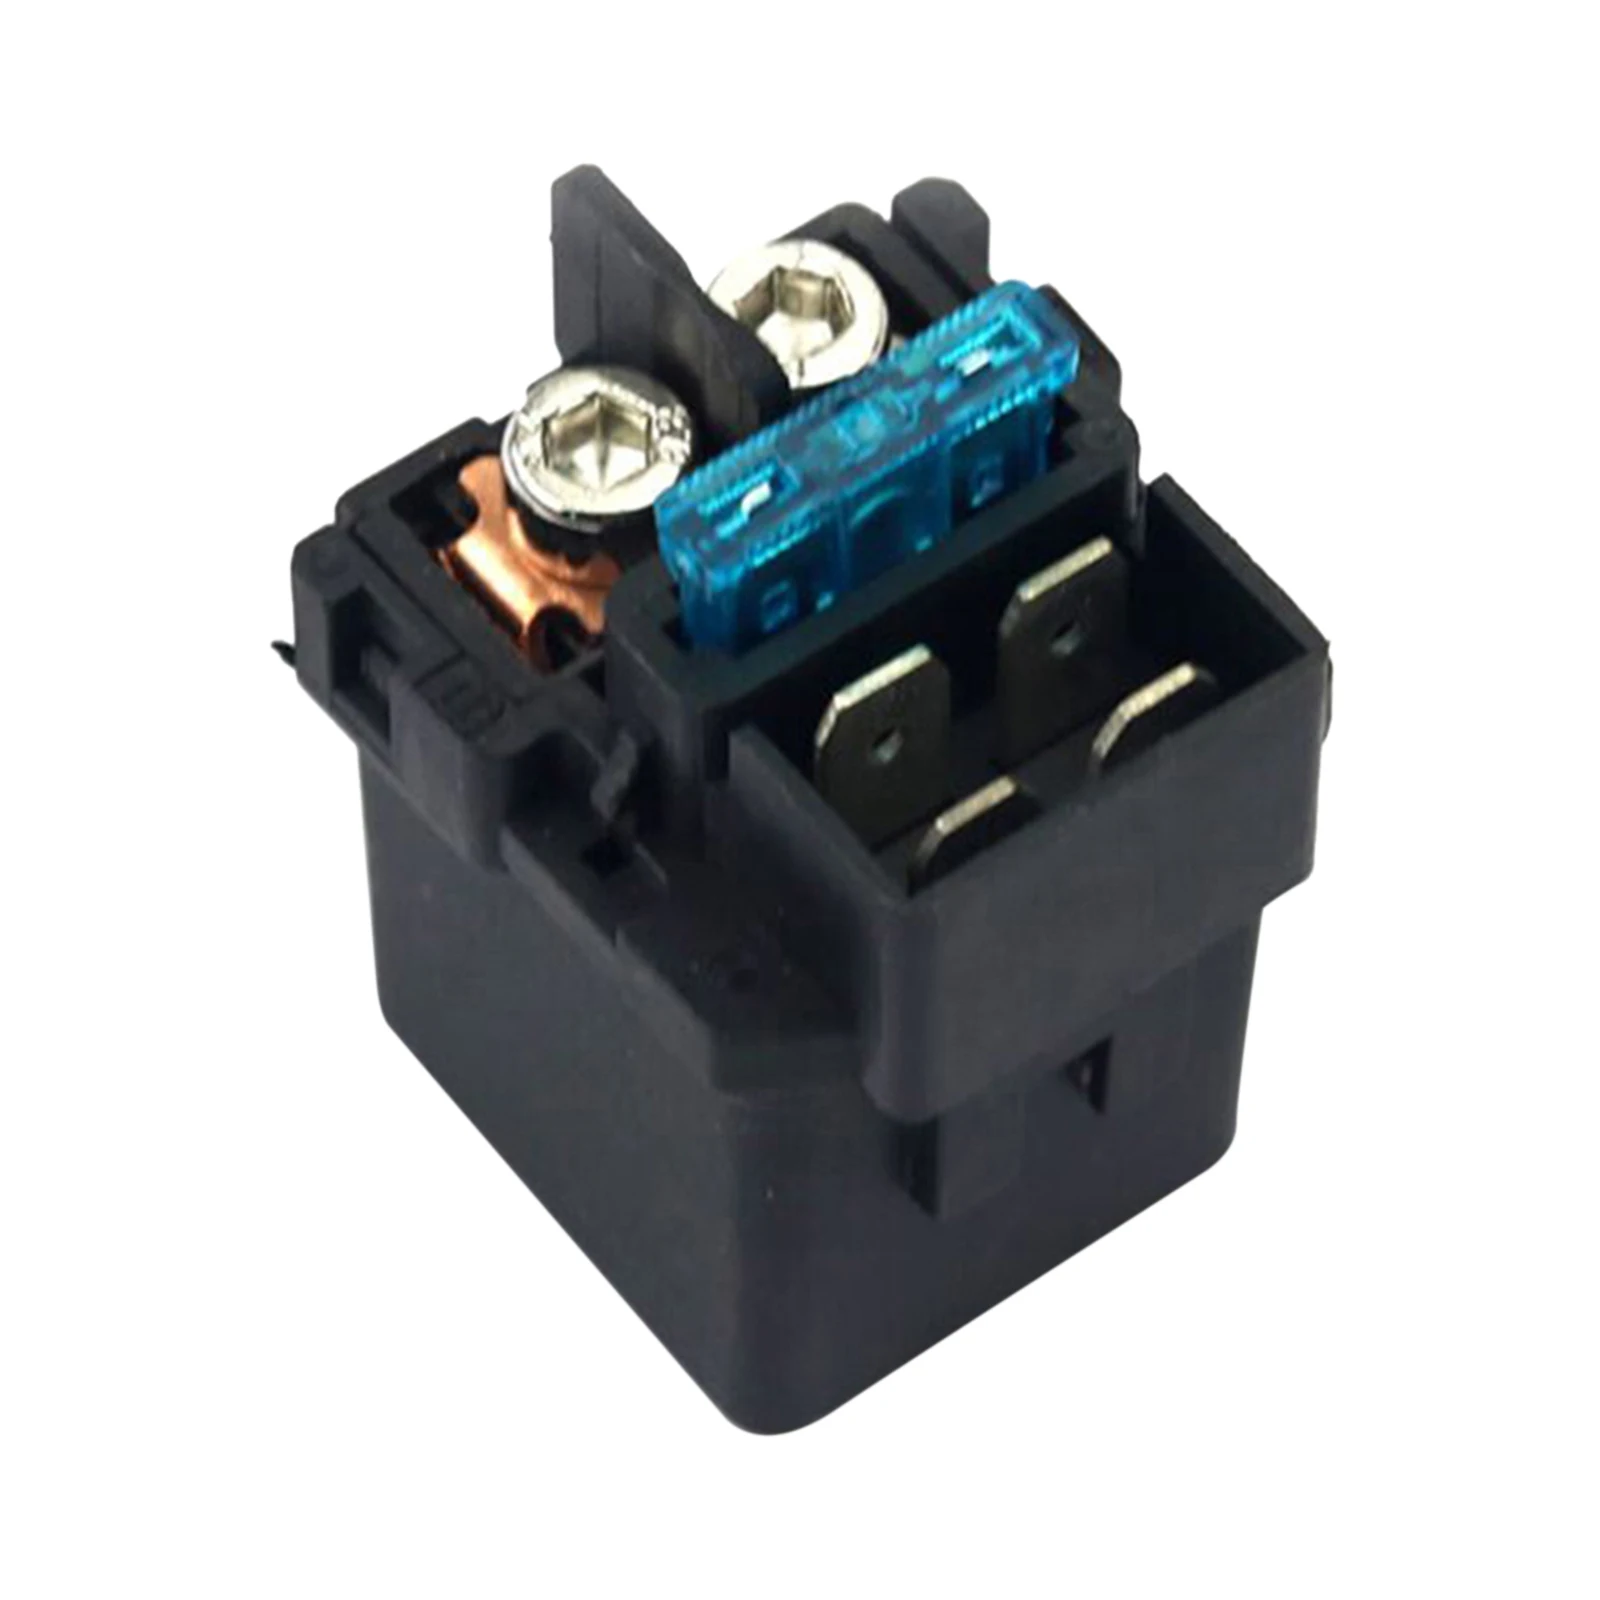 Starter Relay Solenoid for Yamaha FZ 16 FZ-16 YS150 Motorcycle Accessories